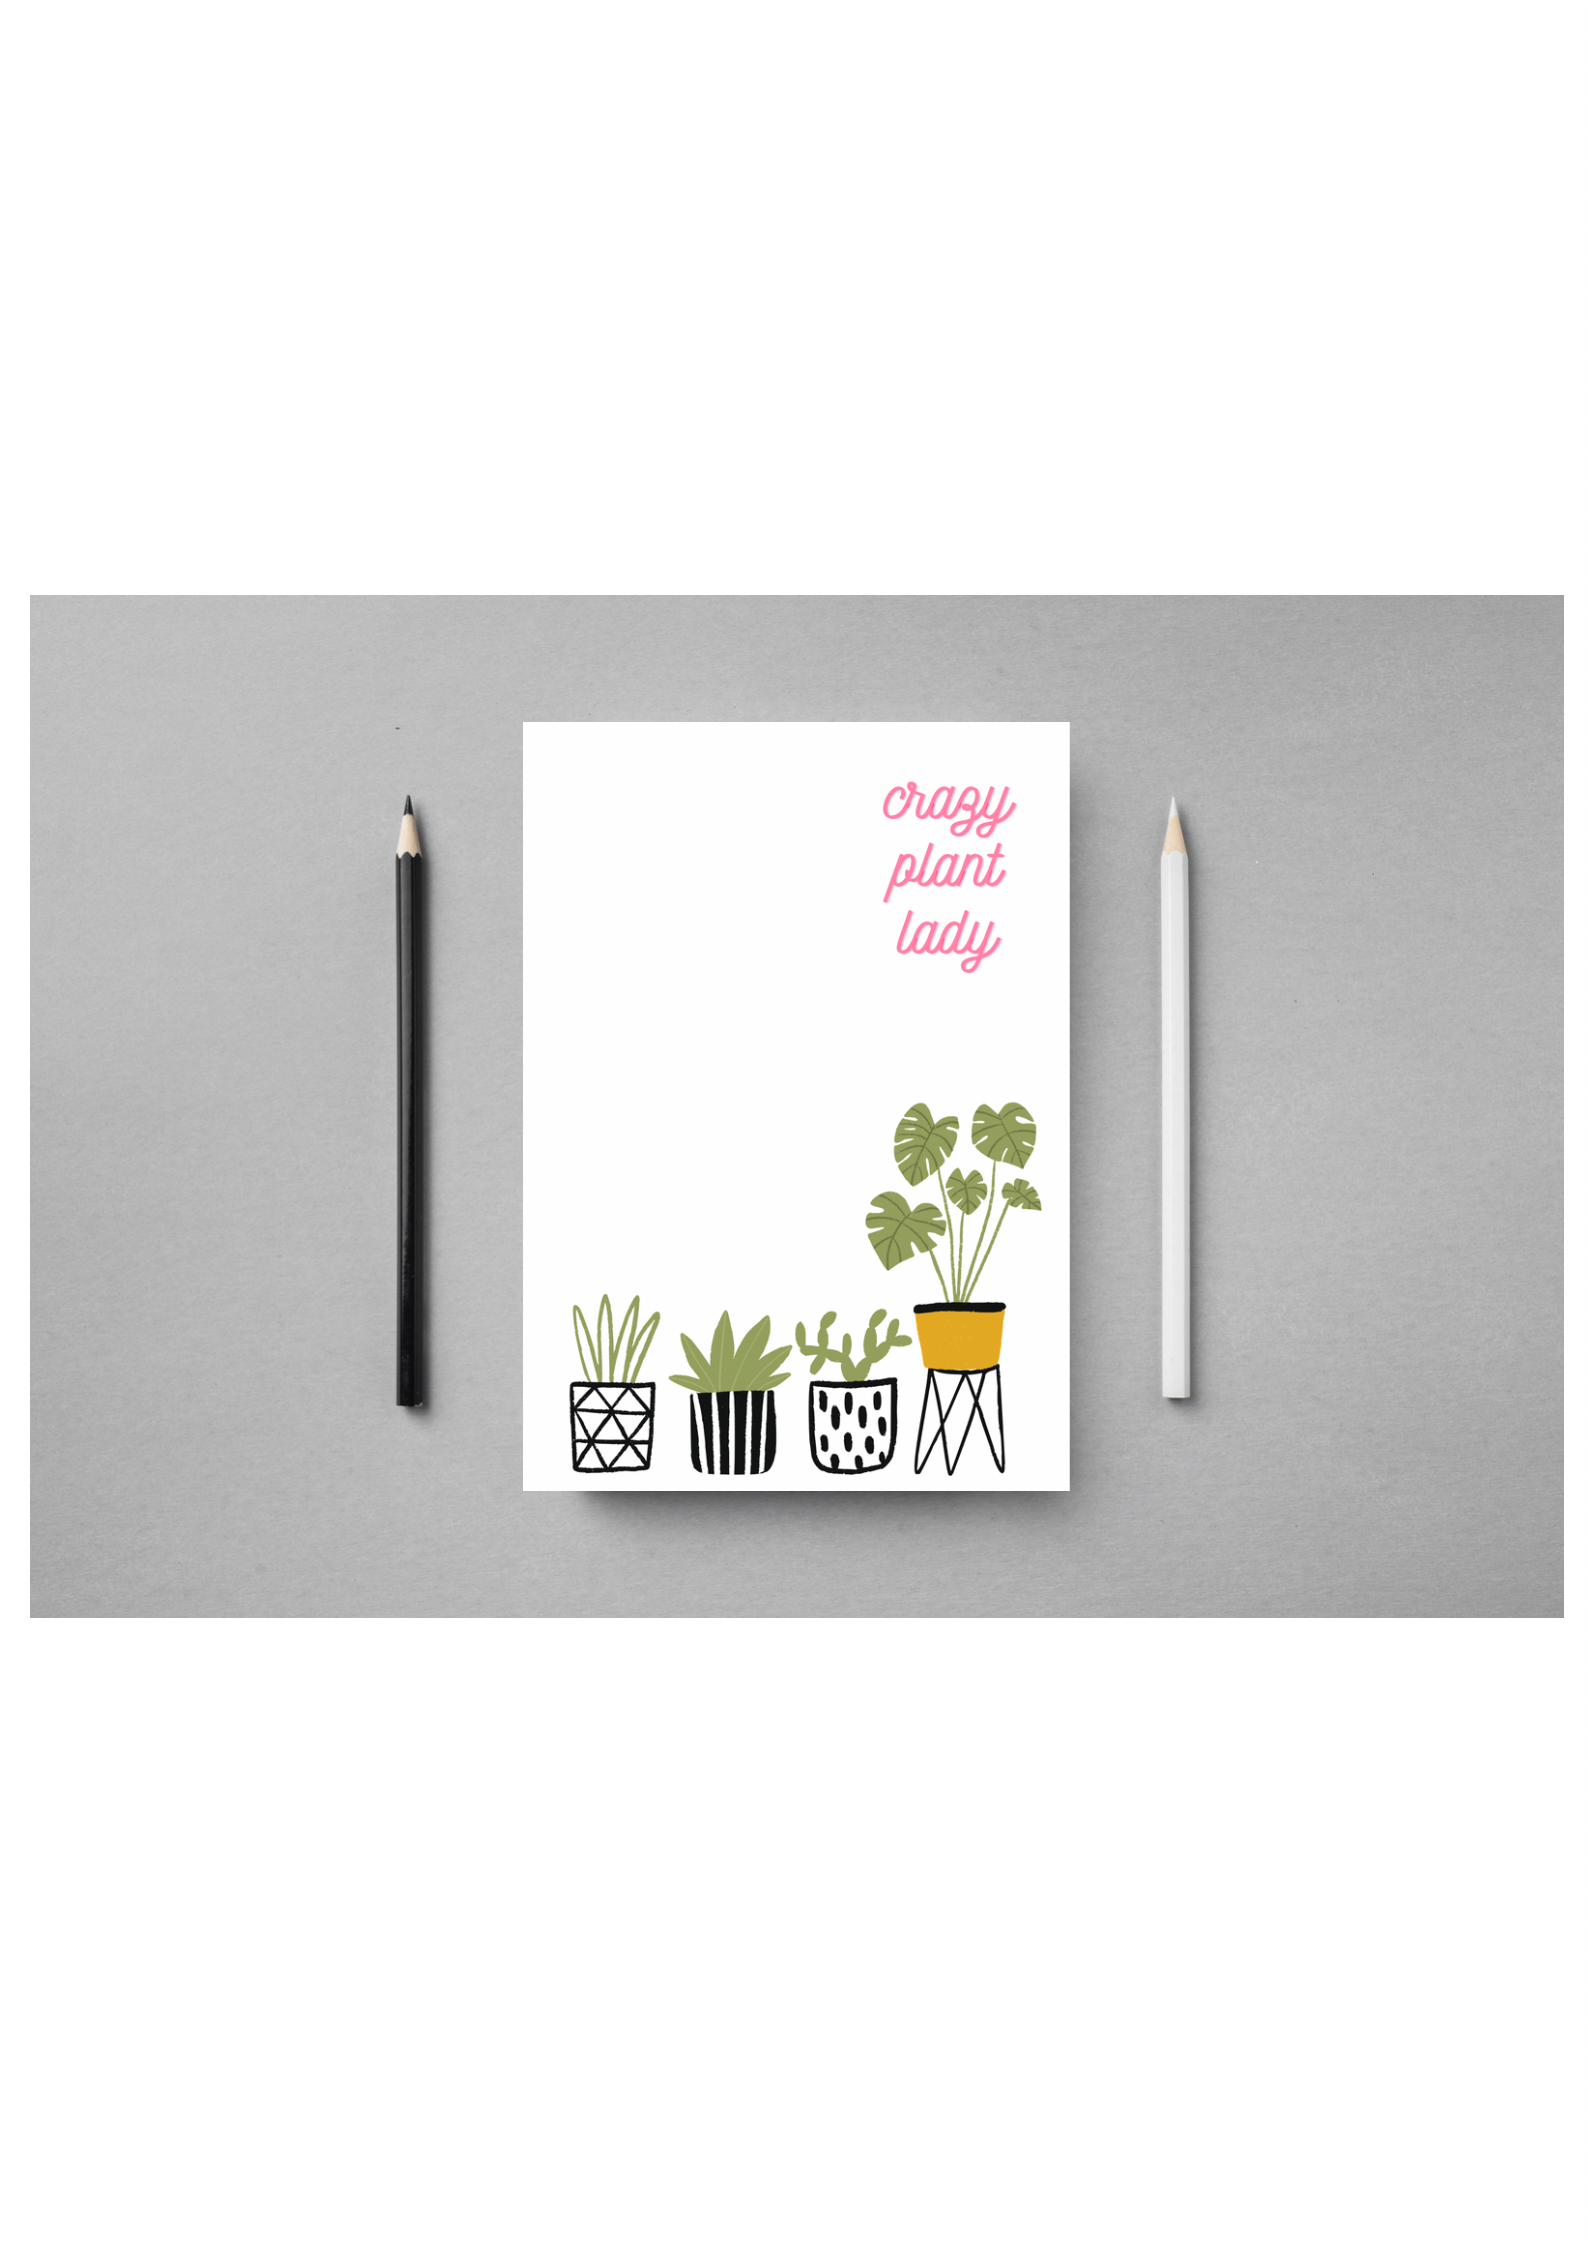 Crazy plant lady A5 white notepad fun cute office stationery for plant lovers